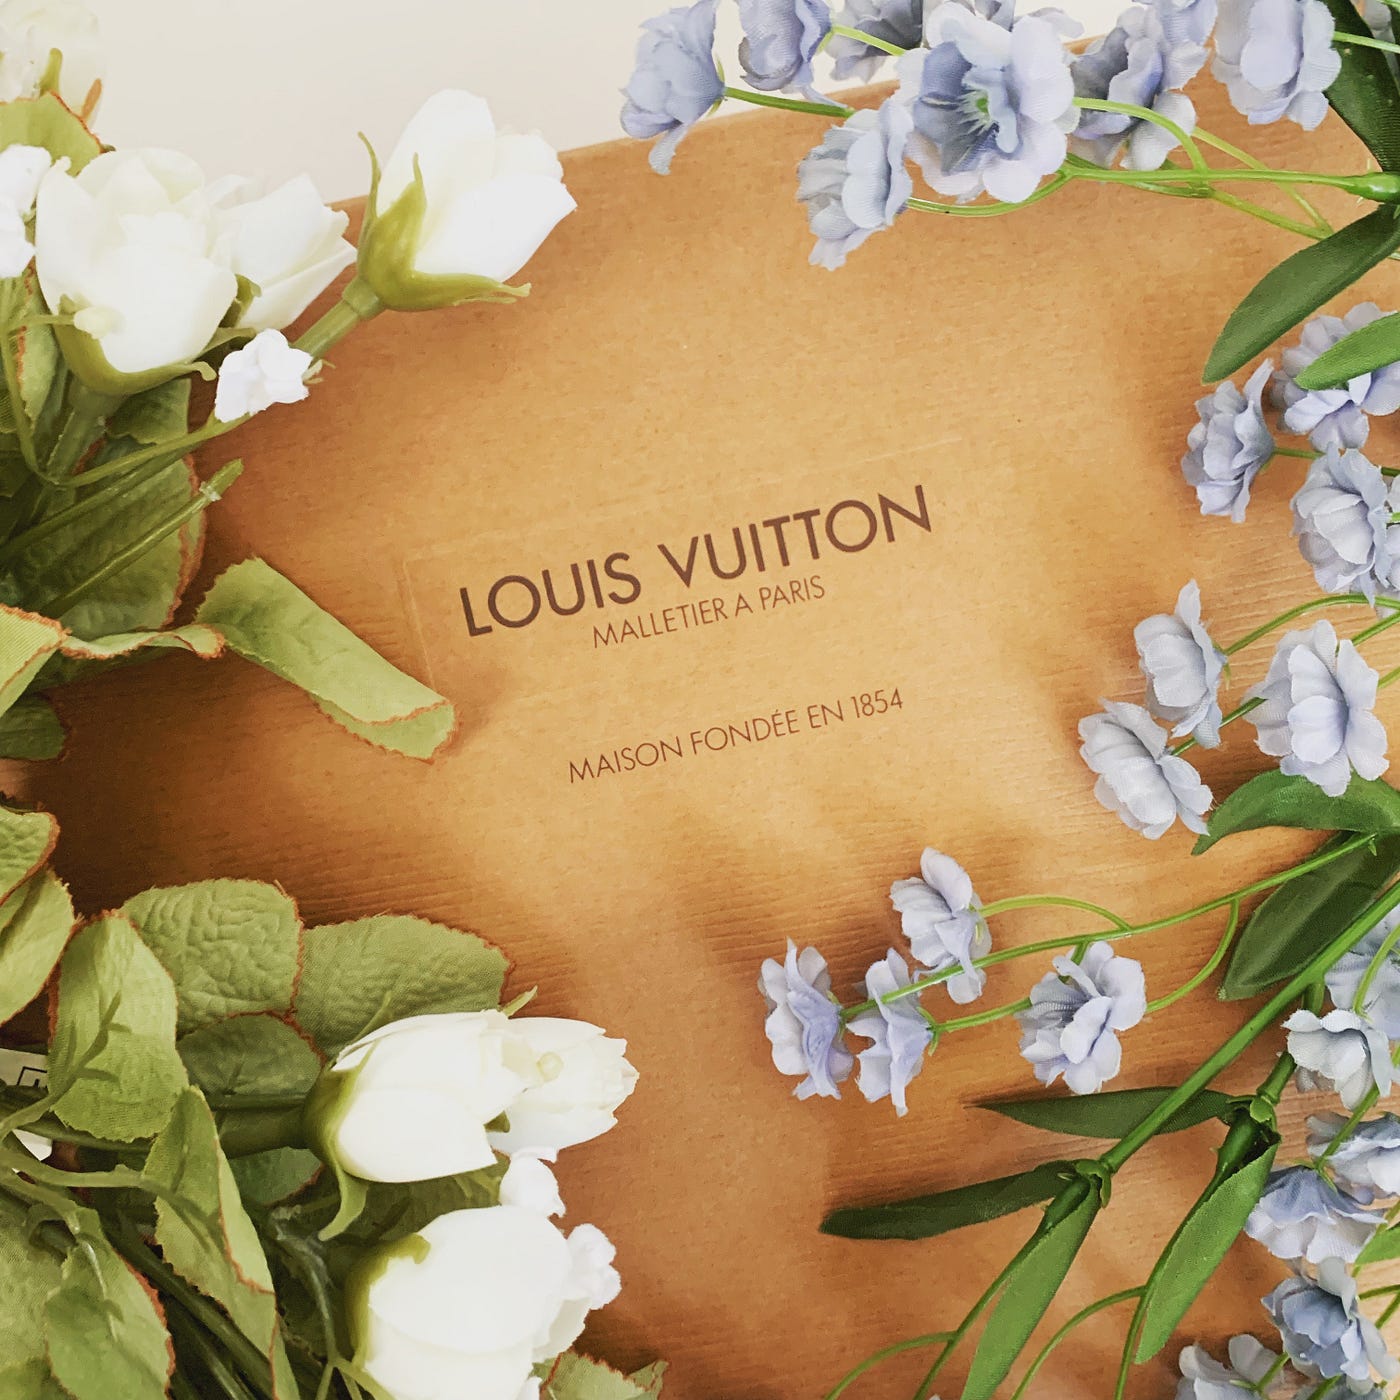 The UX of Louis Vuitton Paris. My wife and I recently got to visit